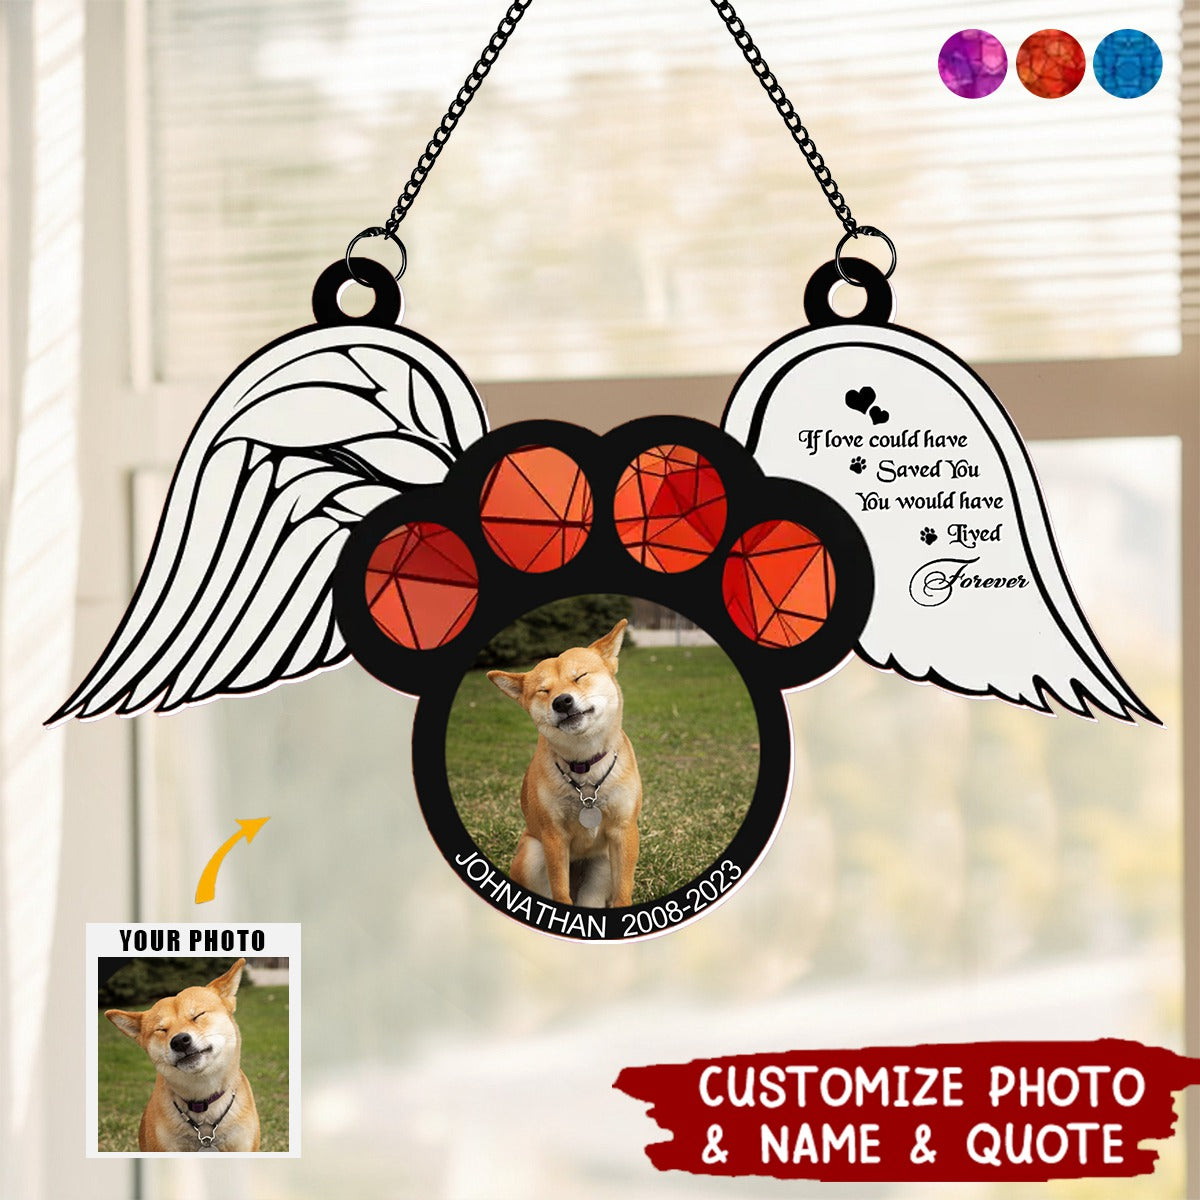 The Moment Your Heart Stopped Mine Changed Forever - Memorial Personalized Dog Paw Hanging Suncatcher Ornament